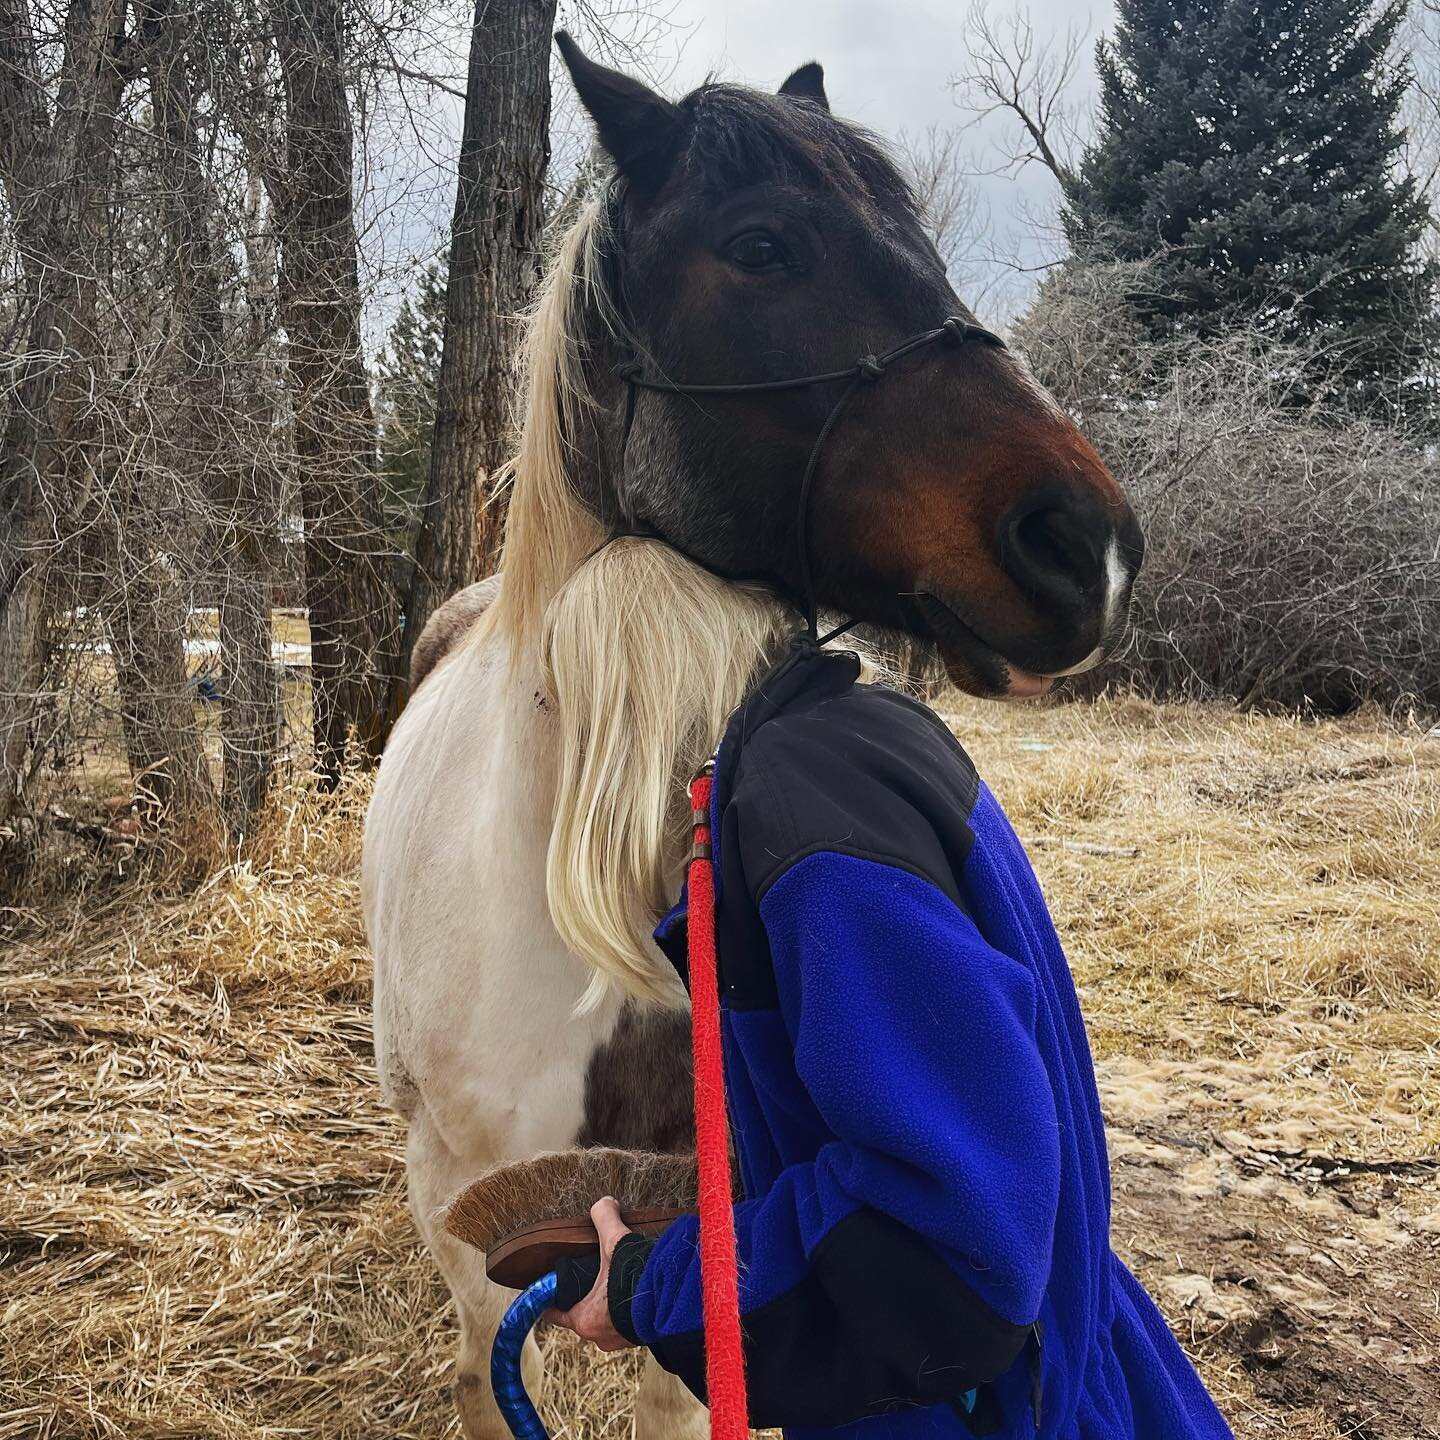 &ldquo;Yesterday was spiritual for me. So very awesome ~ I believe in the power of the healing energy of horses. I felt  so relaxed and calm inside. He intuitively rested his head on mine helping to heal my brain injury ~ that&rsquo;s where my balanc